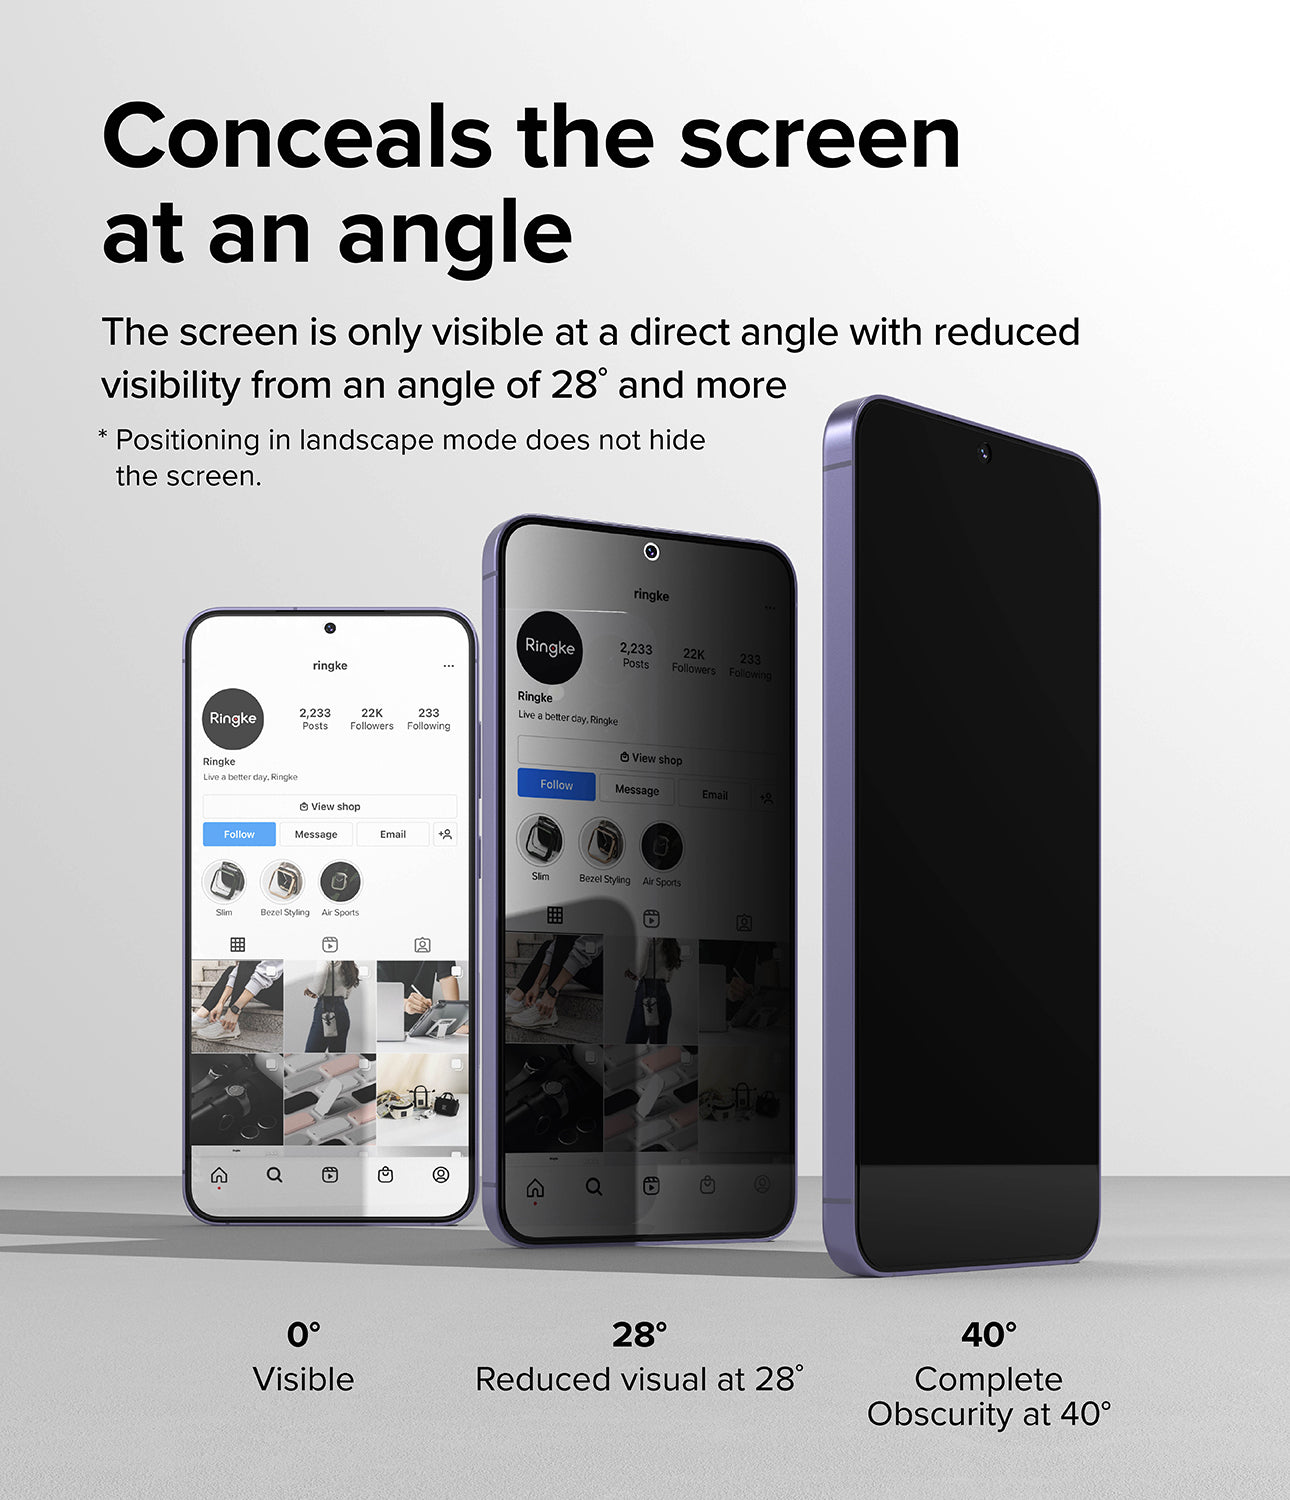 Galaxy S24 Plus Screen Protector | Easy Slide Privacy Tempered Glass - Conceal the screen at an angle. The screen is only visible at a direct angle with reduced visibility from an angle of 28 degrees and more.